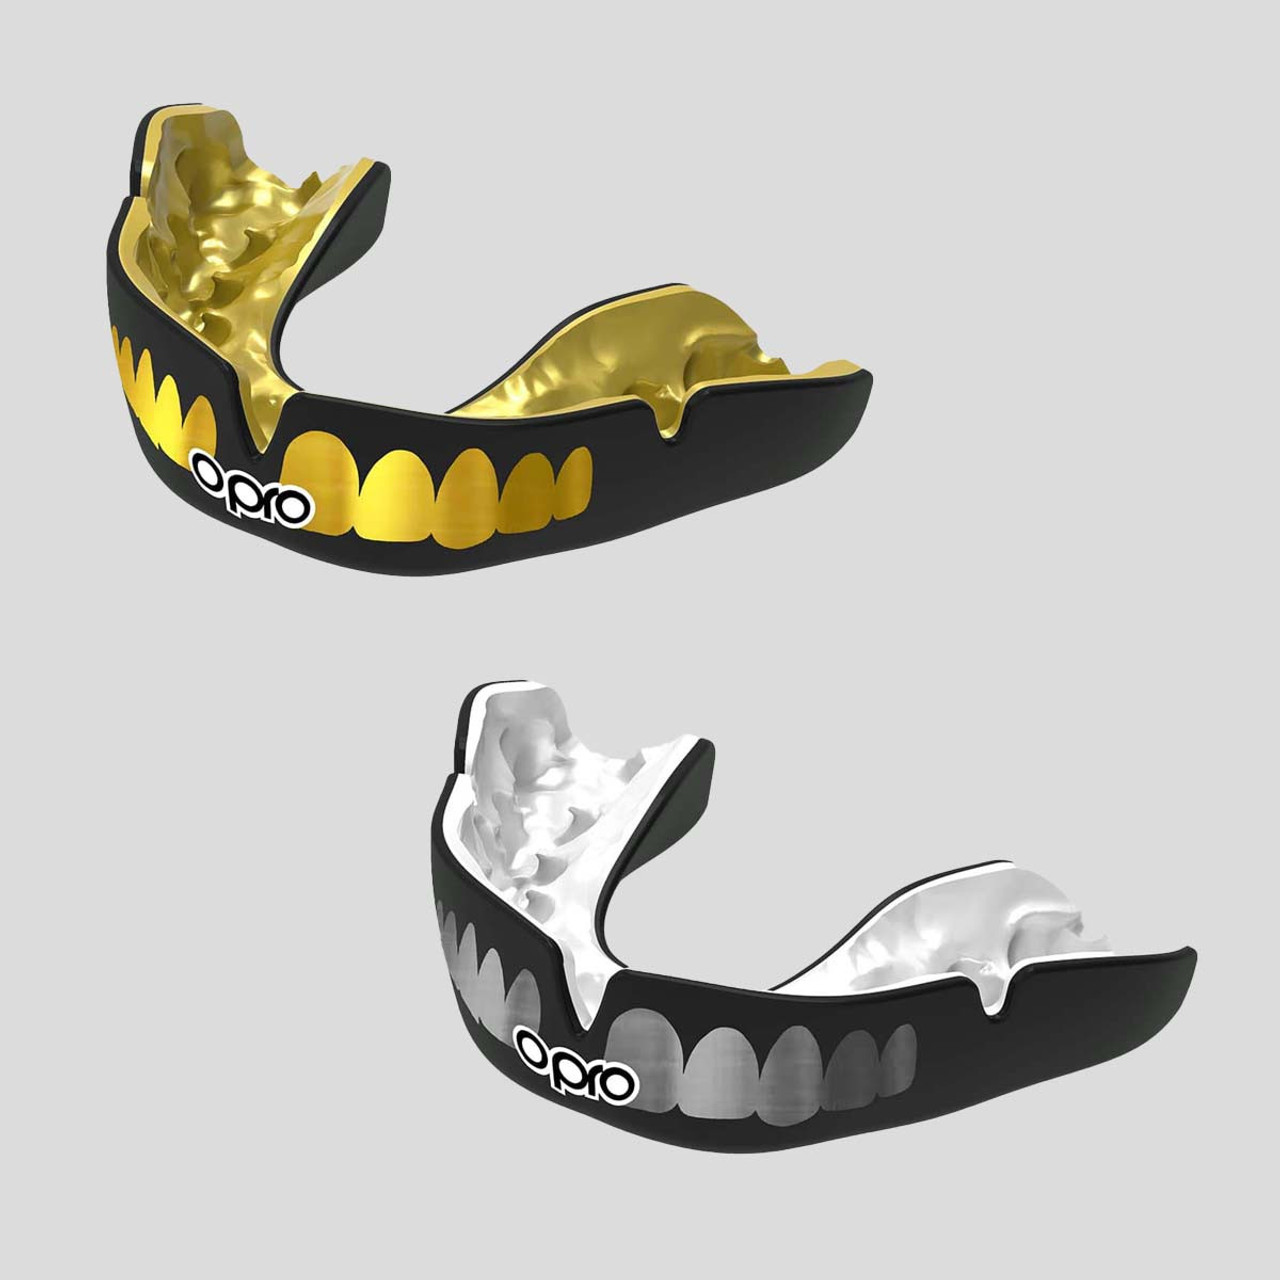 Real Teeth Mouthguards - Hilarious, Unique, and Protective